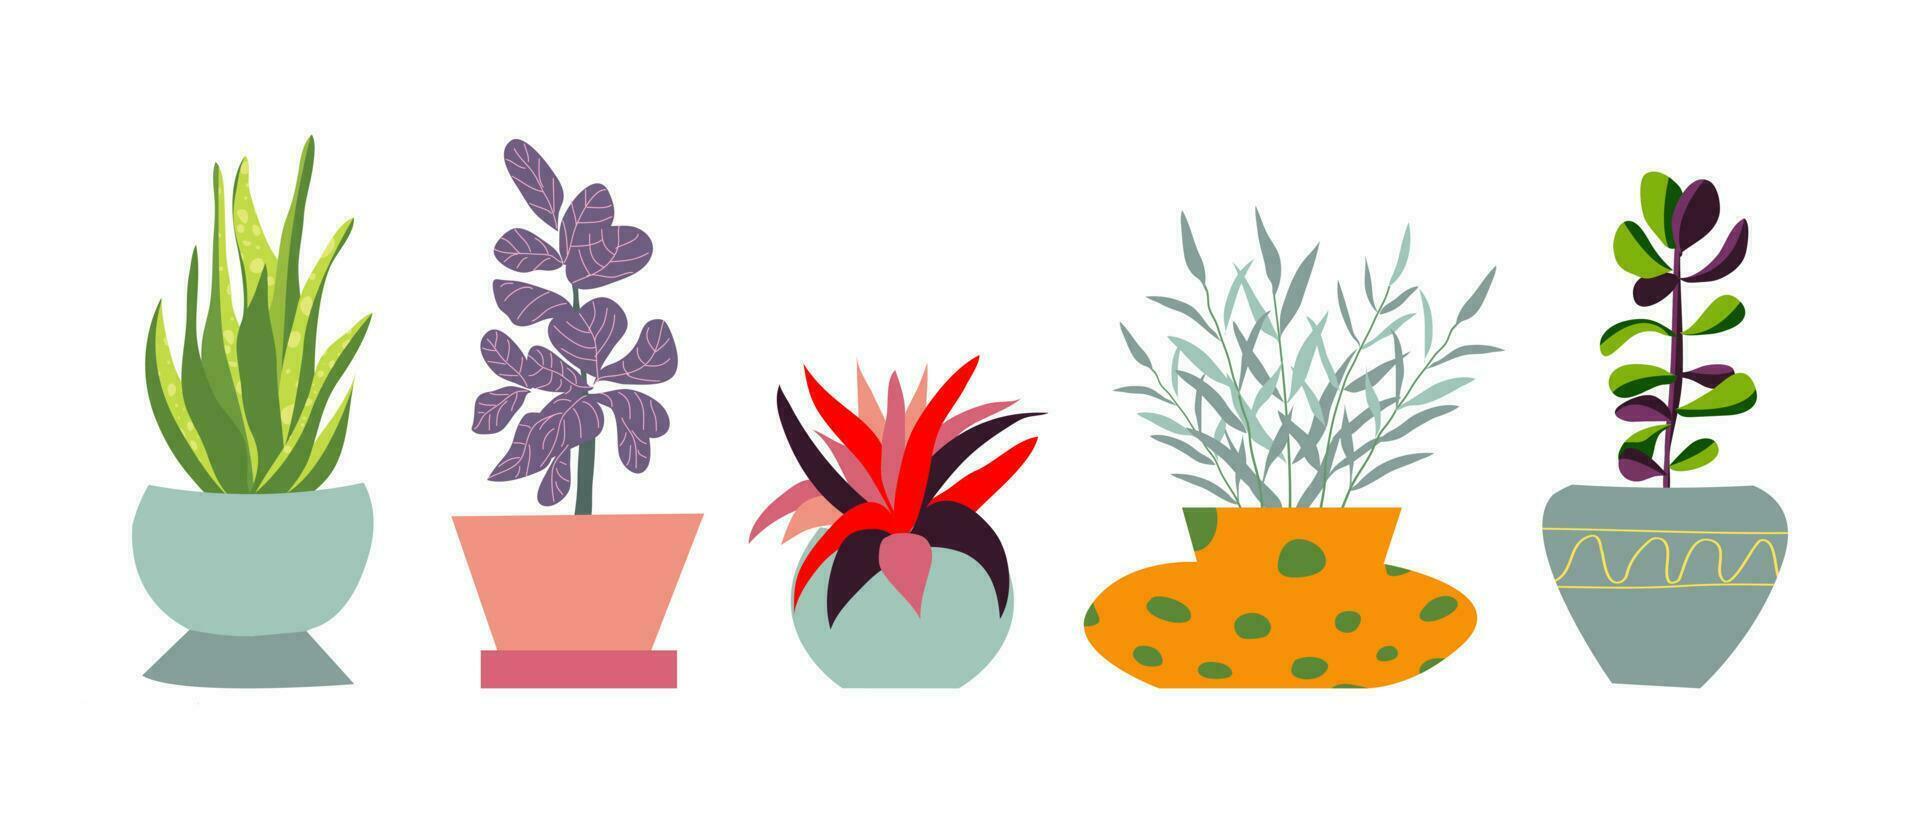 Urban jungle, trendy home decor with plants, tropical leaves in stylish planters and pots. Cartoon style vector